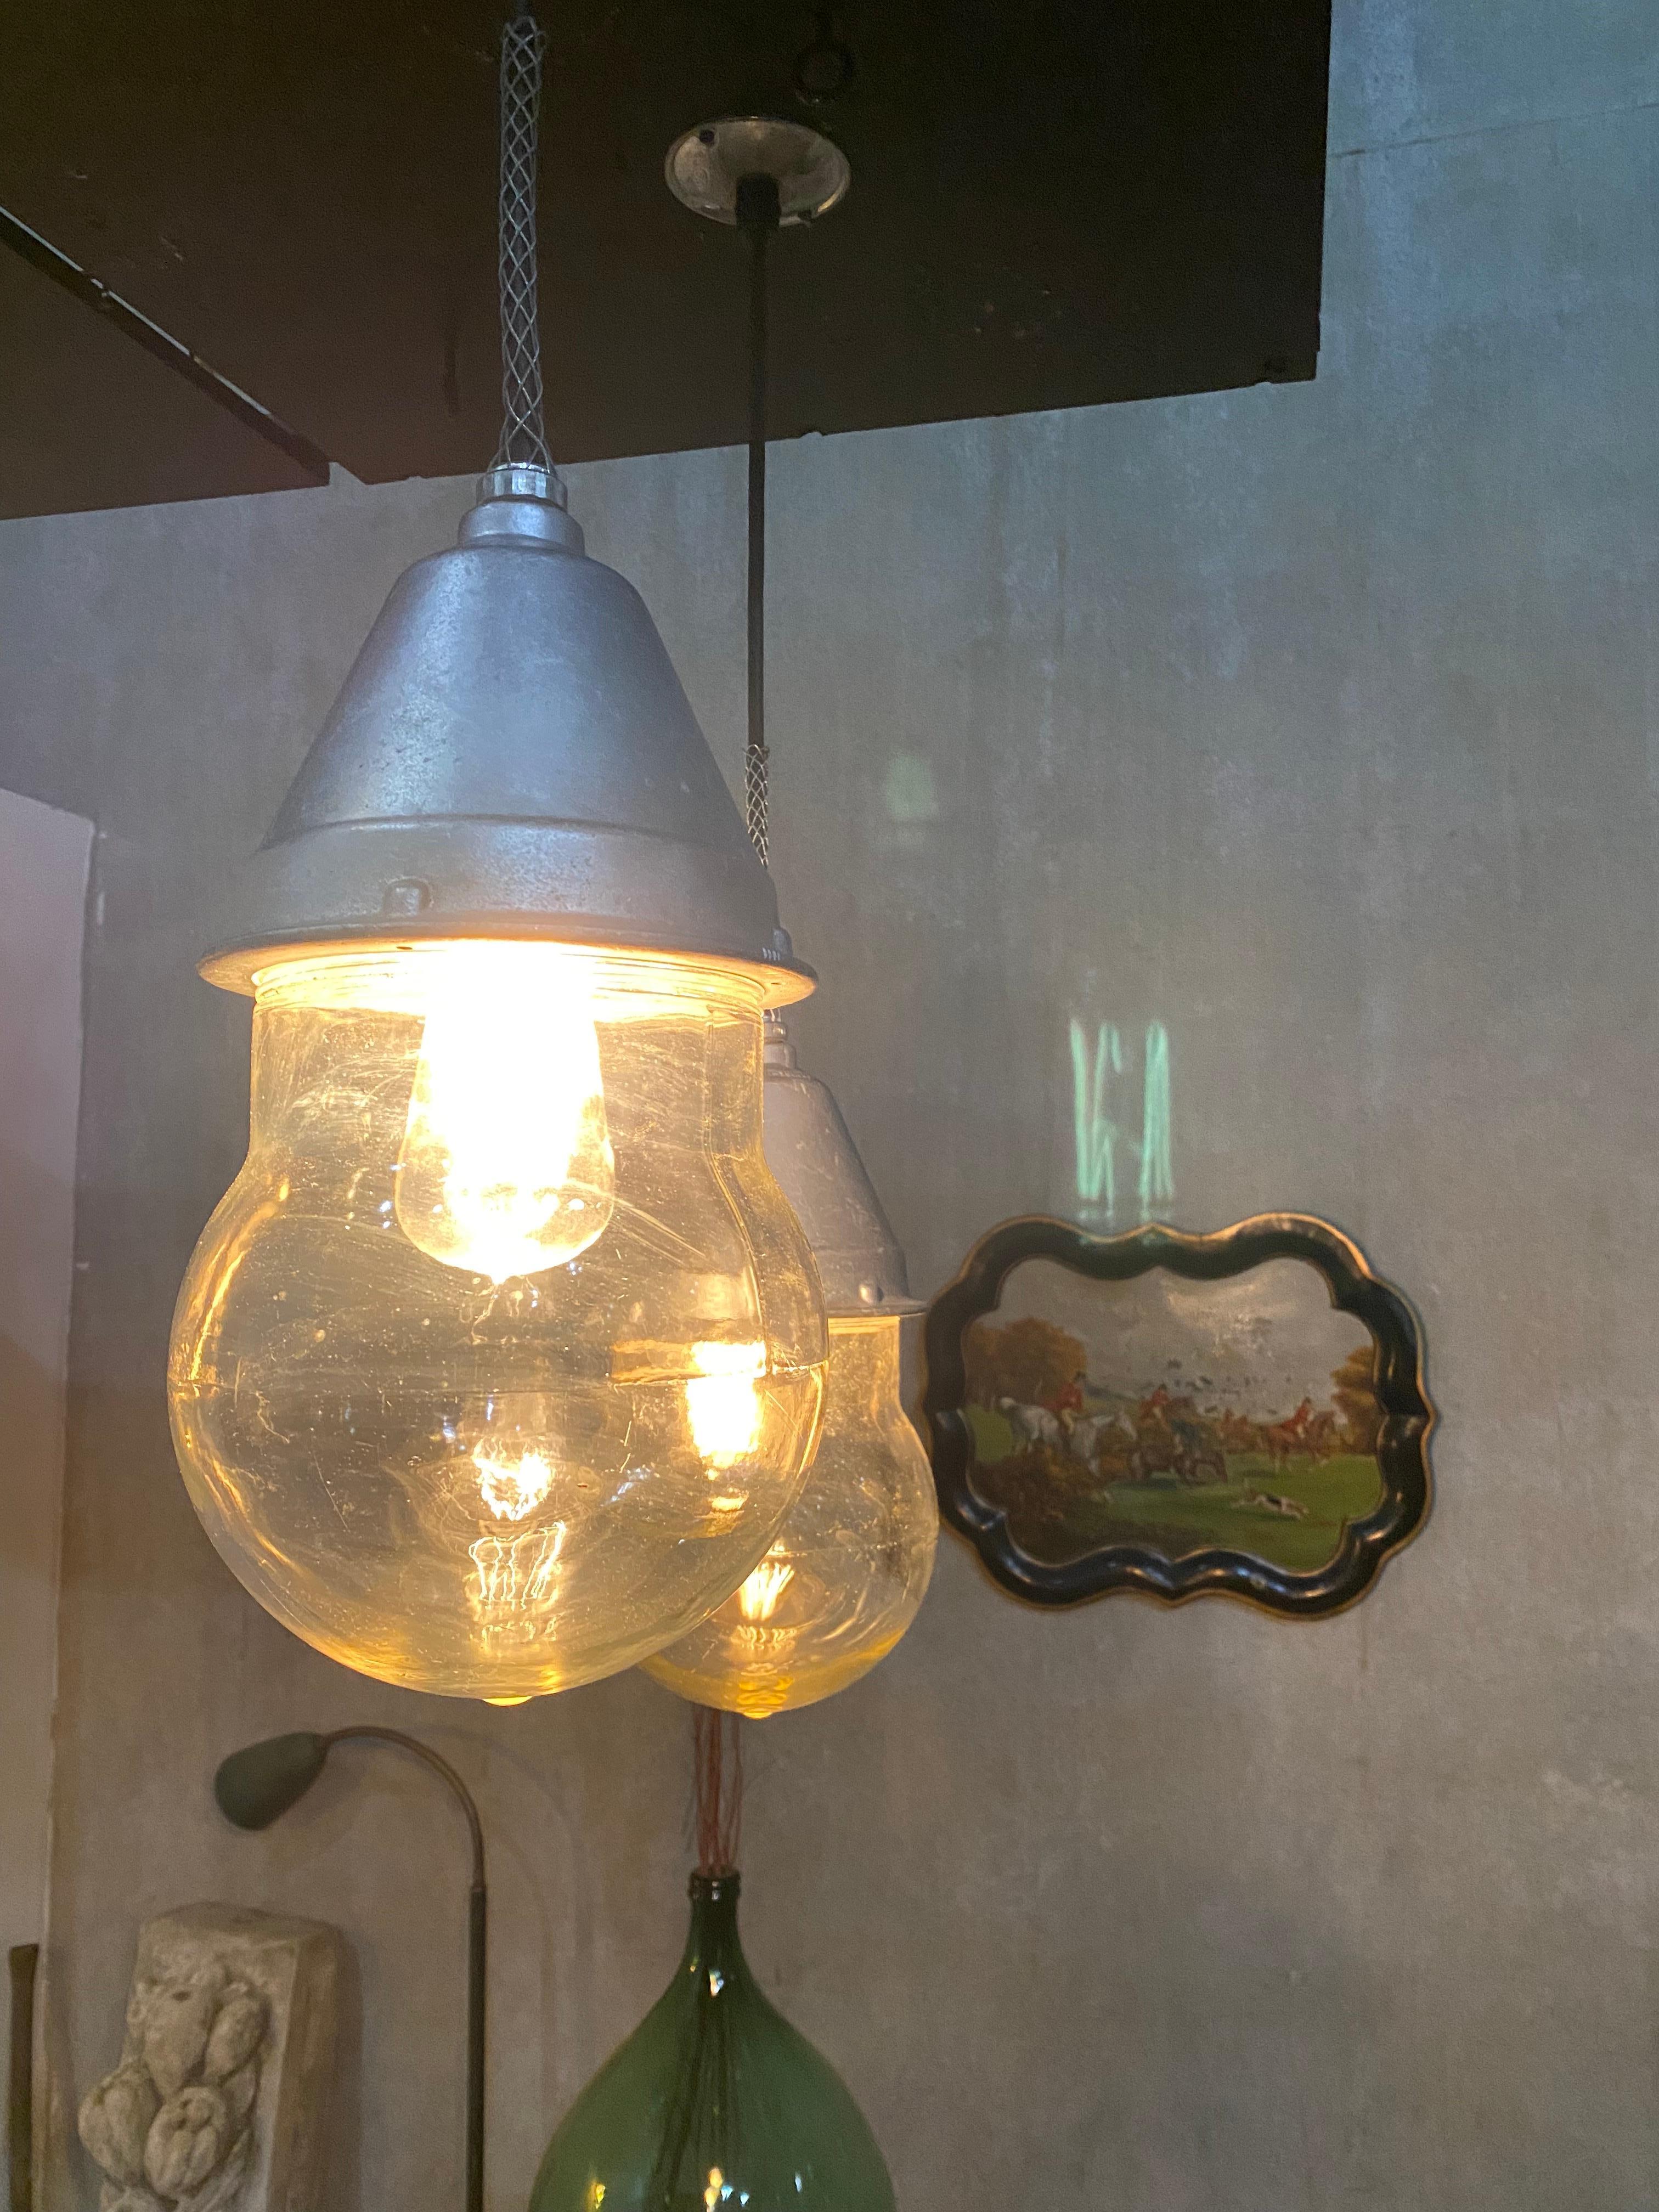 We have 6 Oversized fully working Crouse hinds lights rewired and csa tested , with full heavy glass globes. A statement in industrial pendant form.
A tough find to get 6 in working condition.
Priced per light.